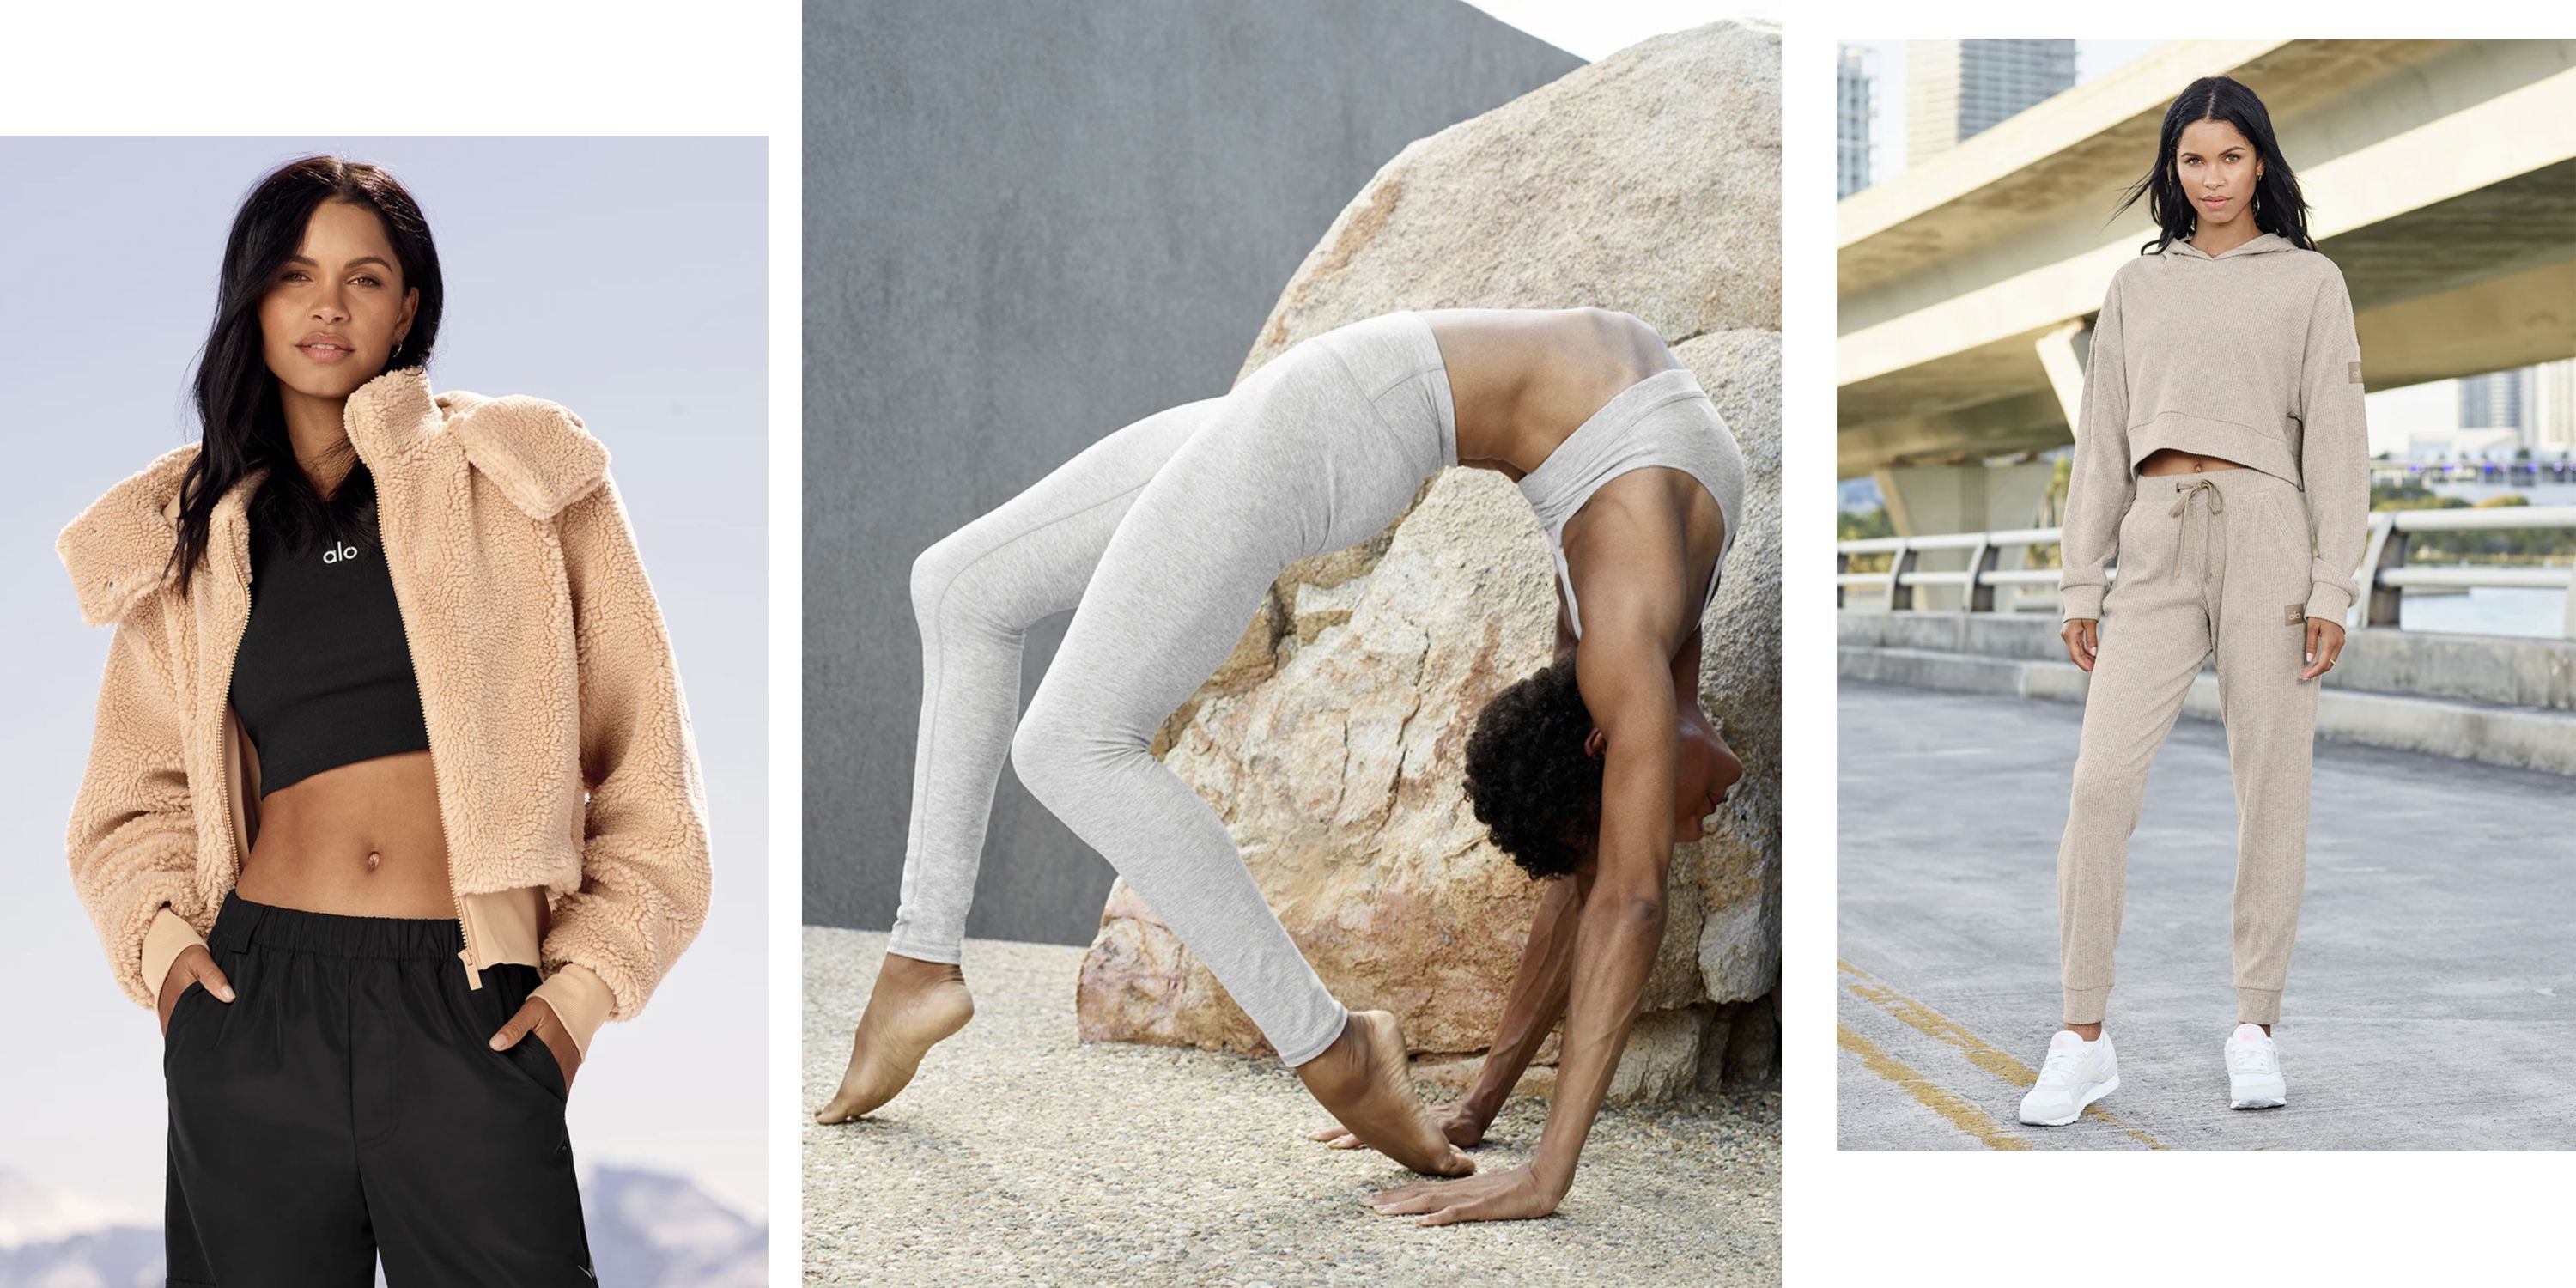 New Soft Alert — Must-Have Alosoft! ✨ - Alo Yoga Email Archive